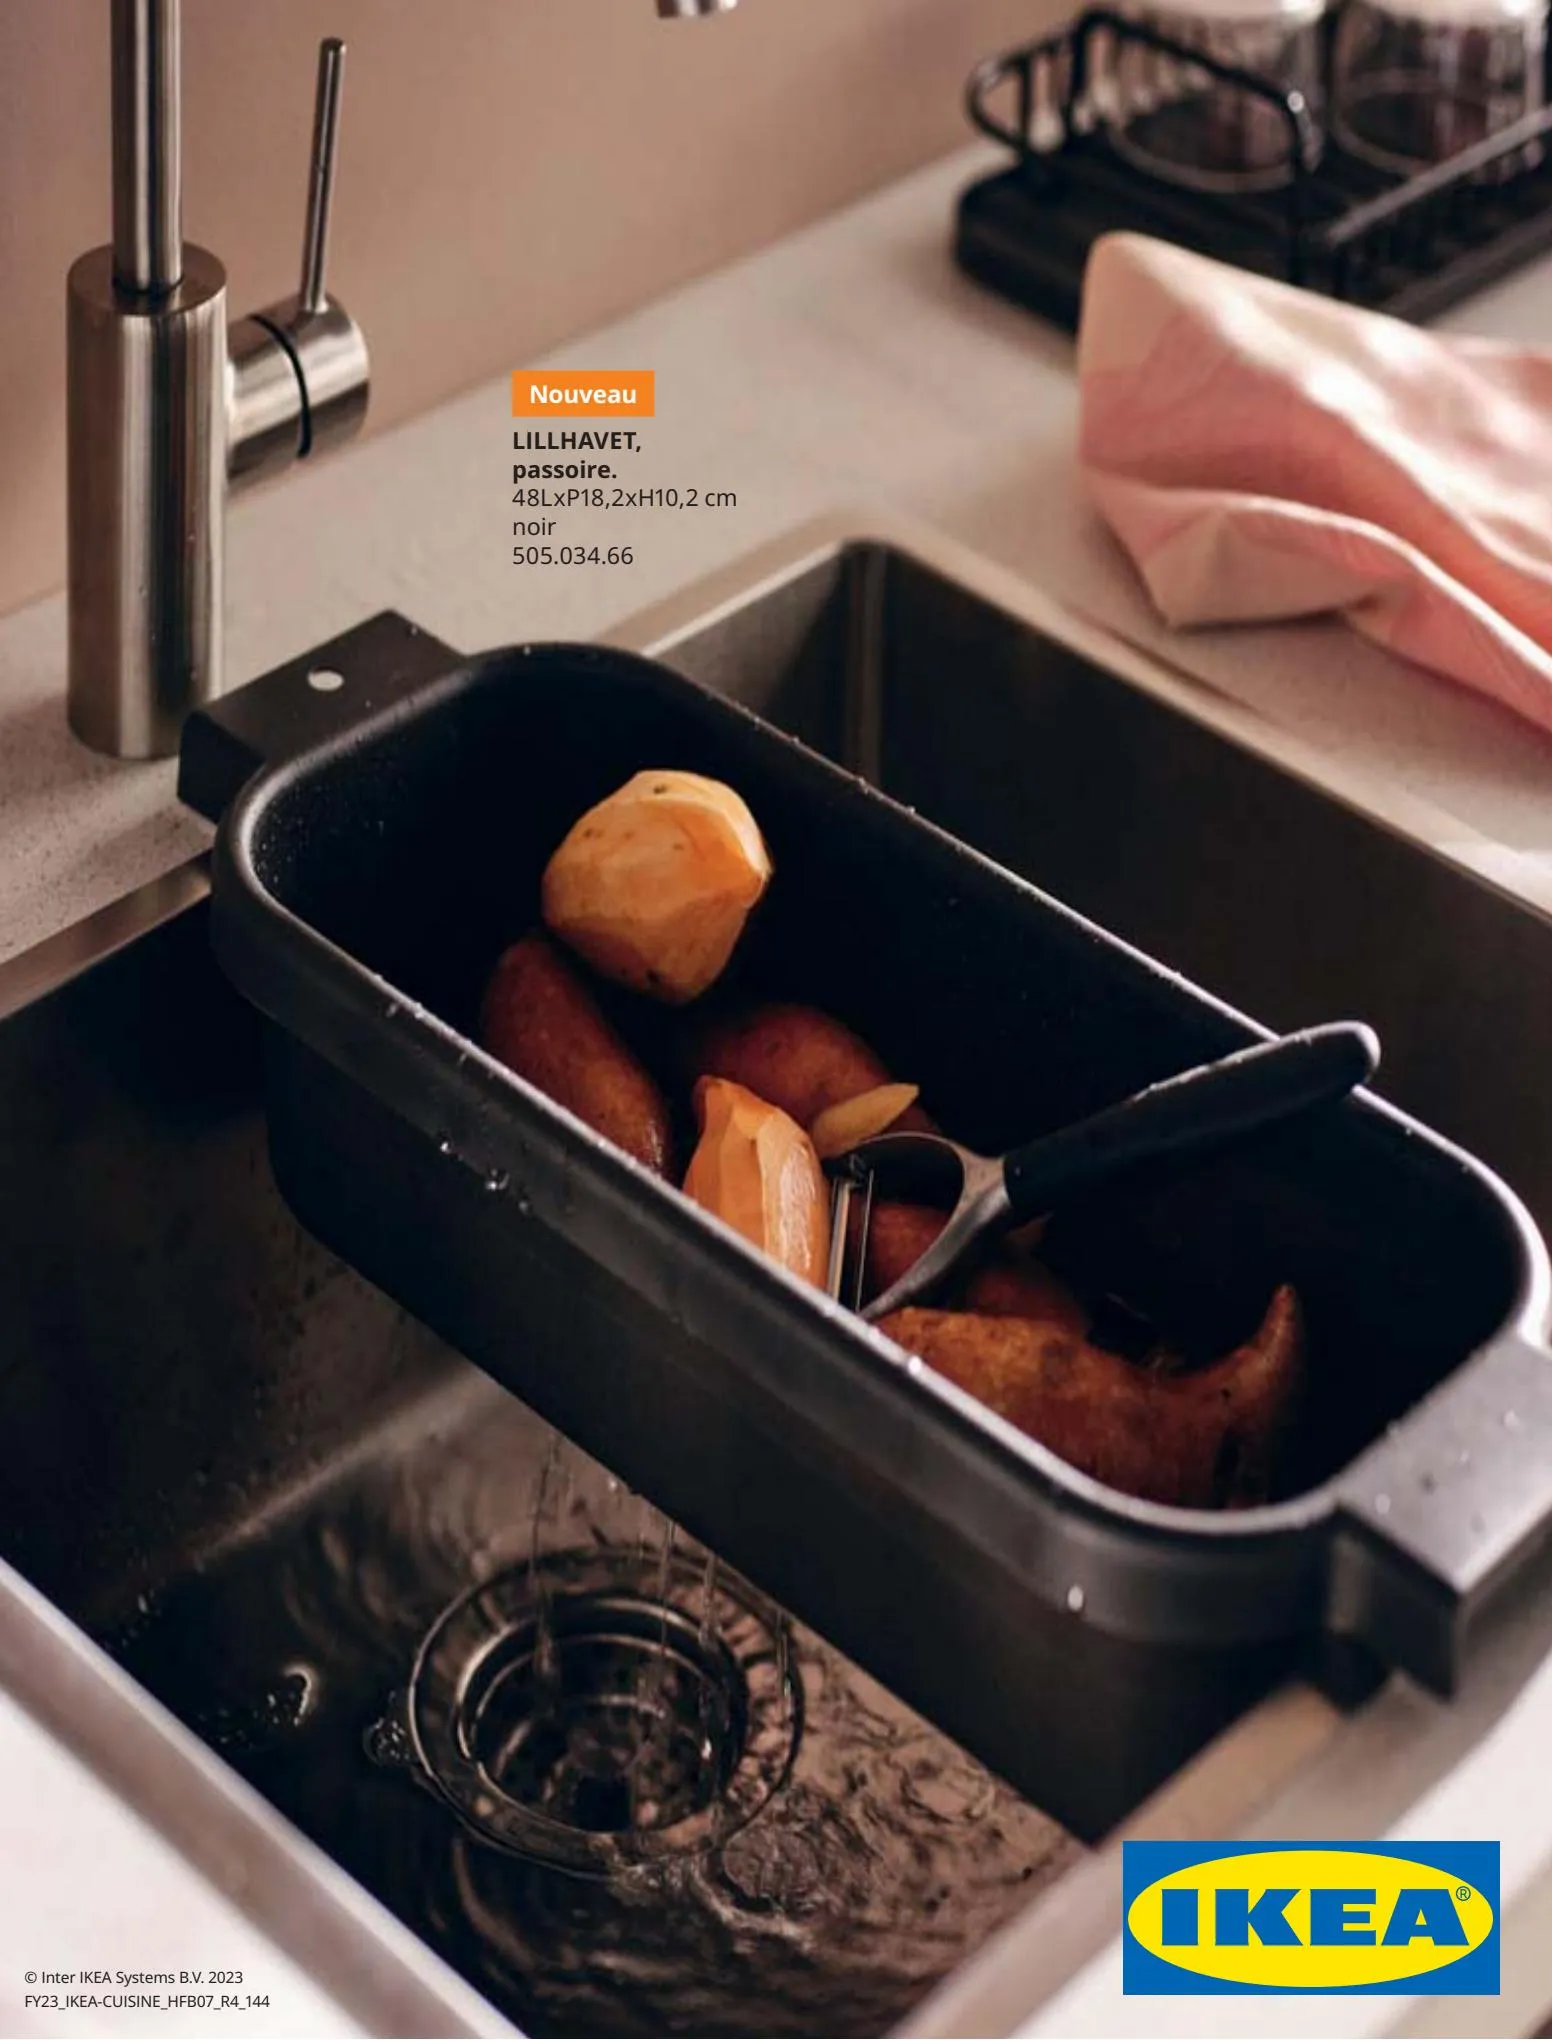 Catalogue IKEA CUISINES Guide d’achat 2023, page 00148